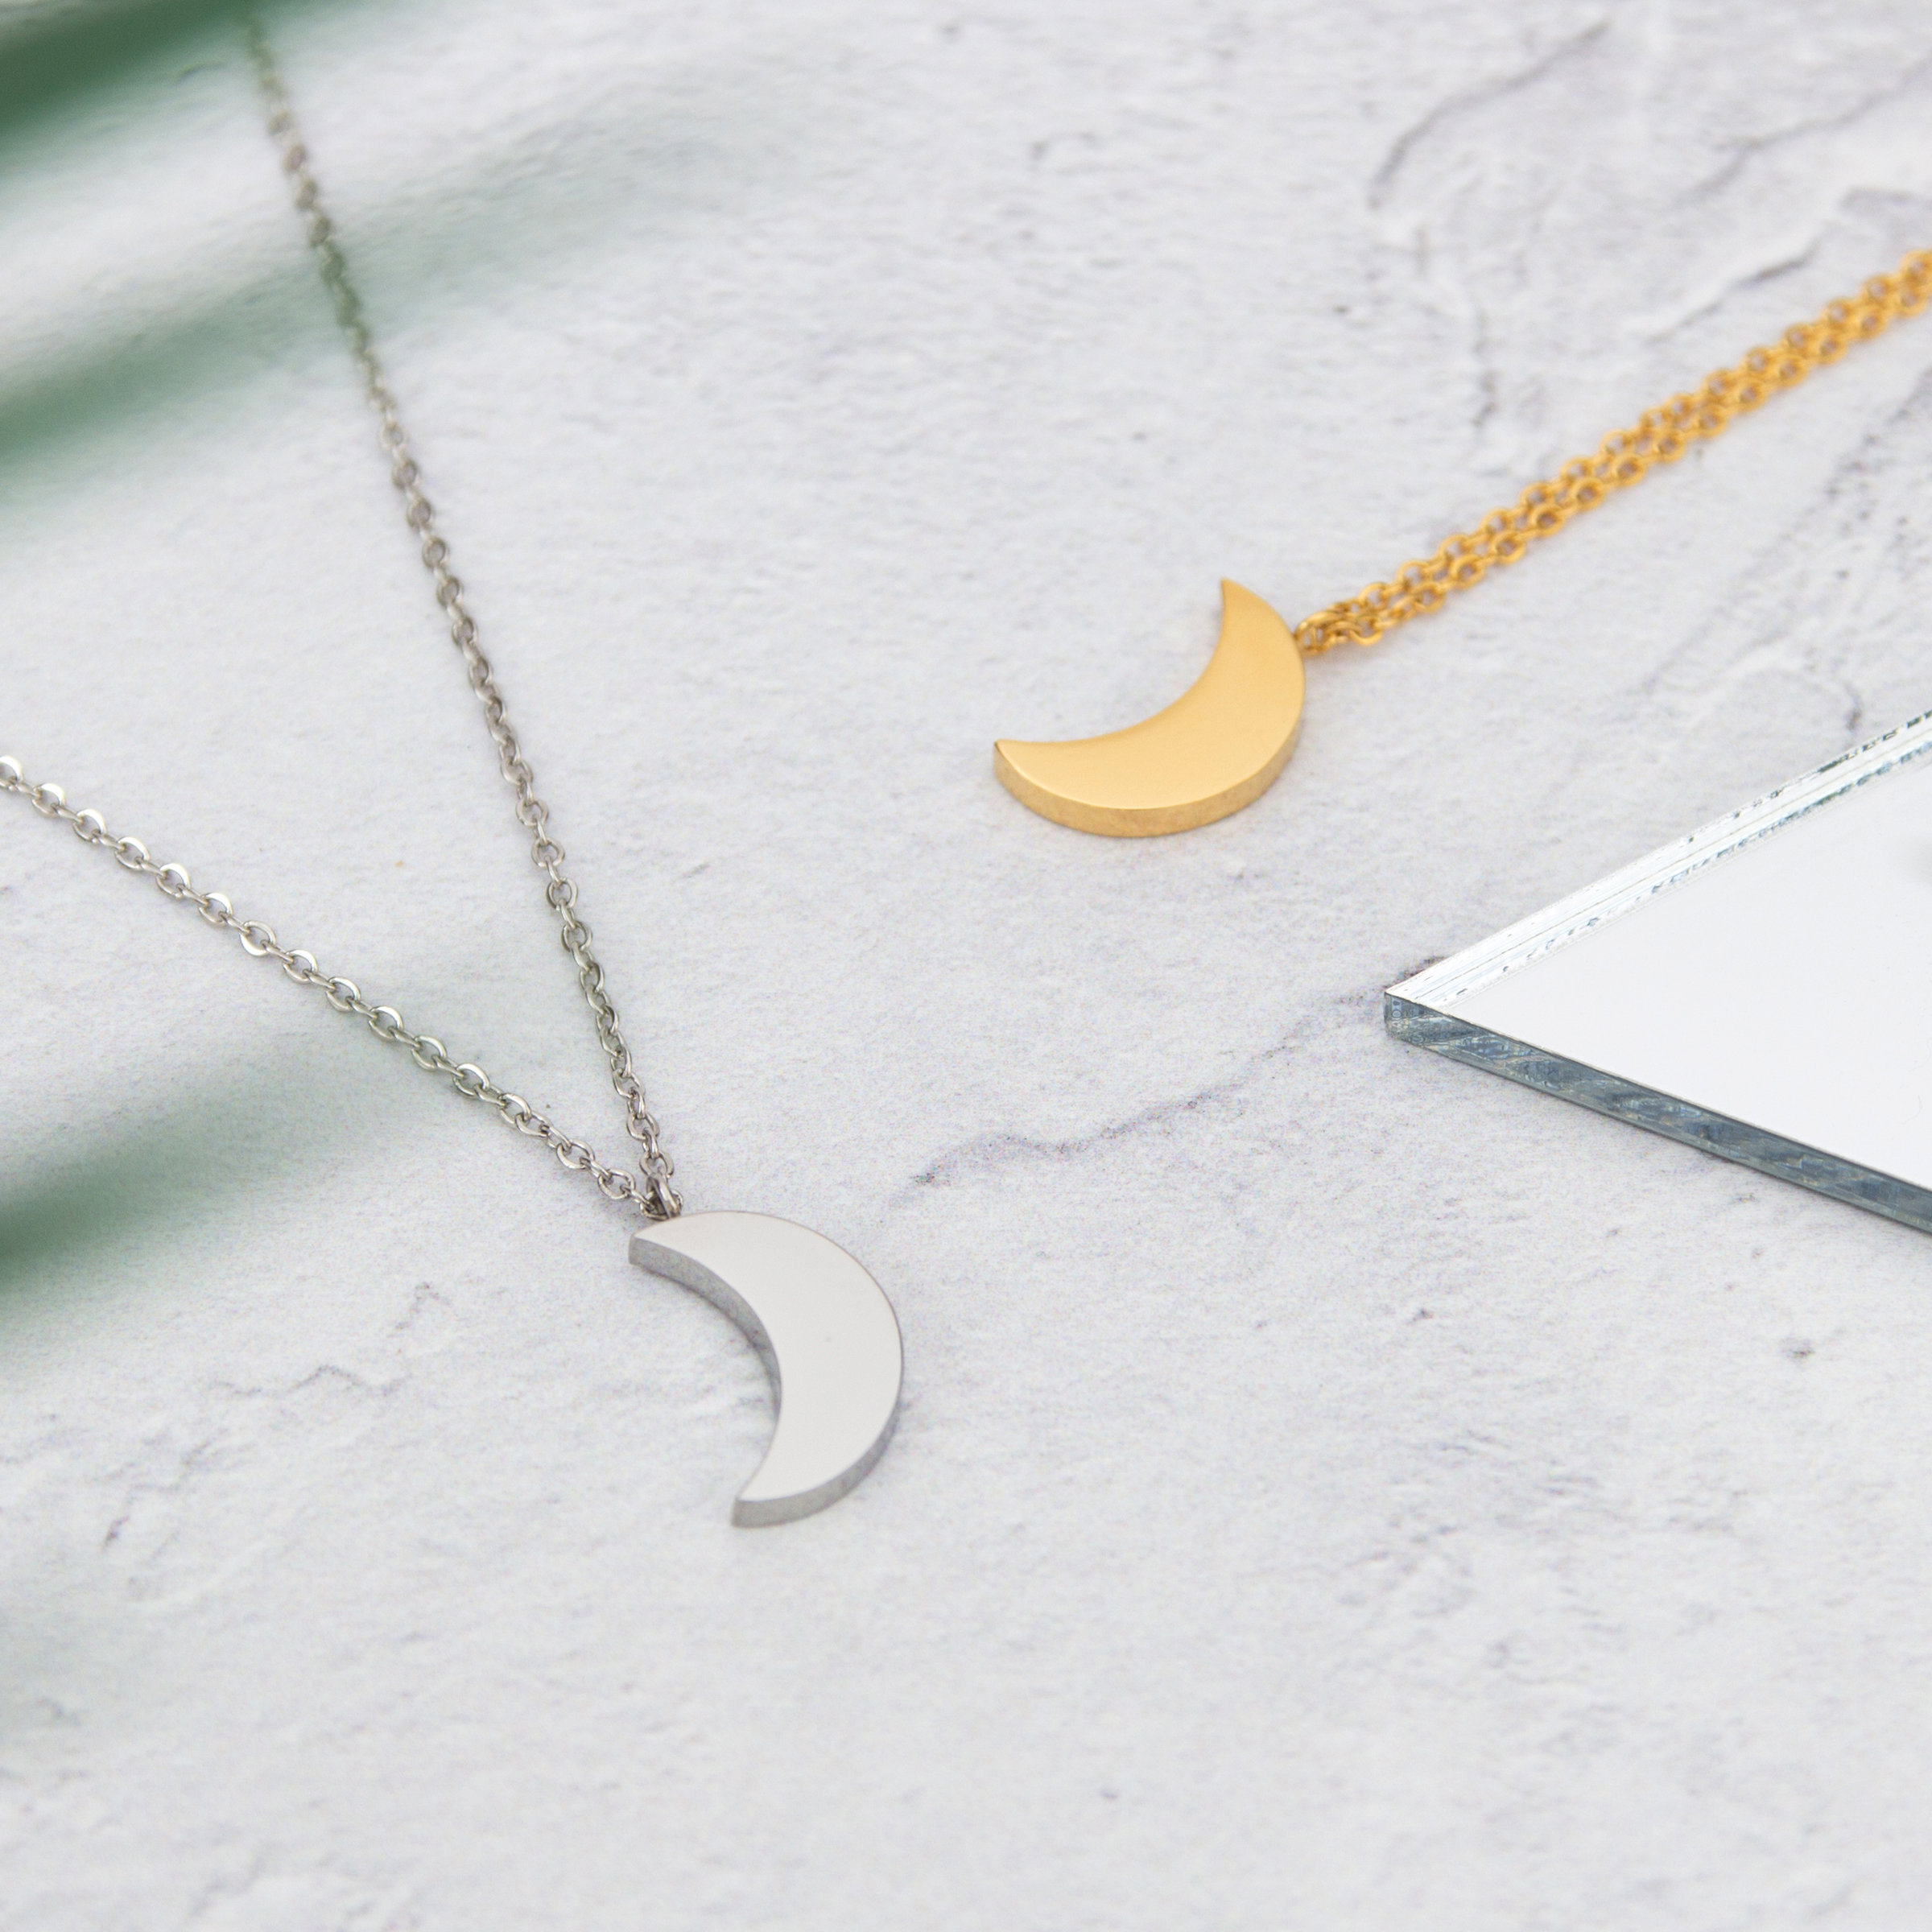 Kuku gold and silver crescent moon necklaces